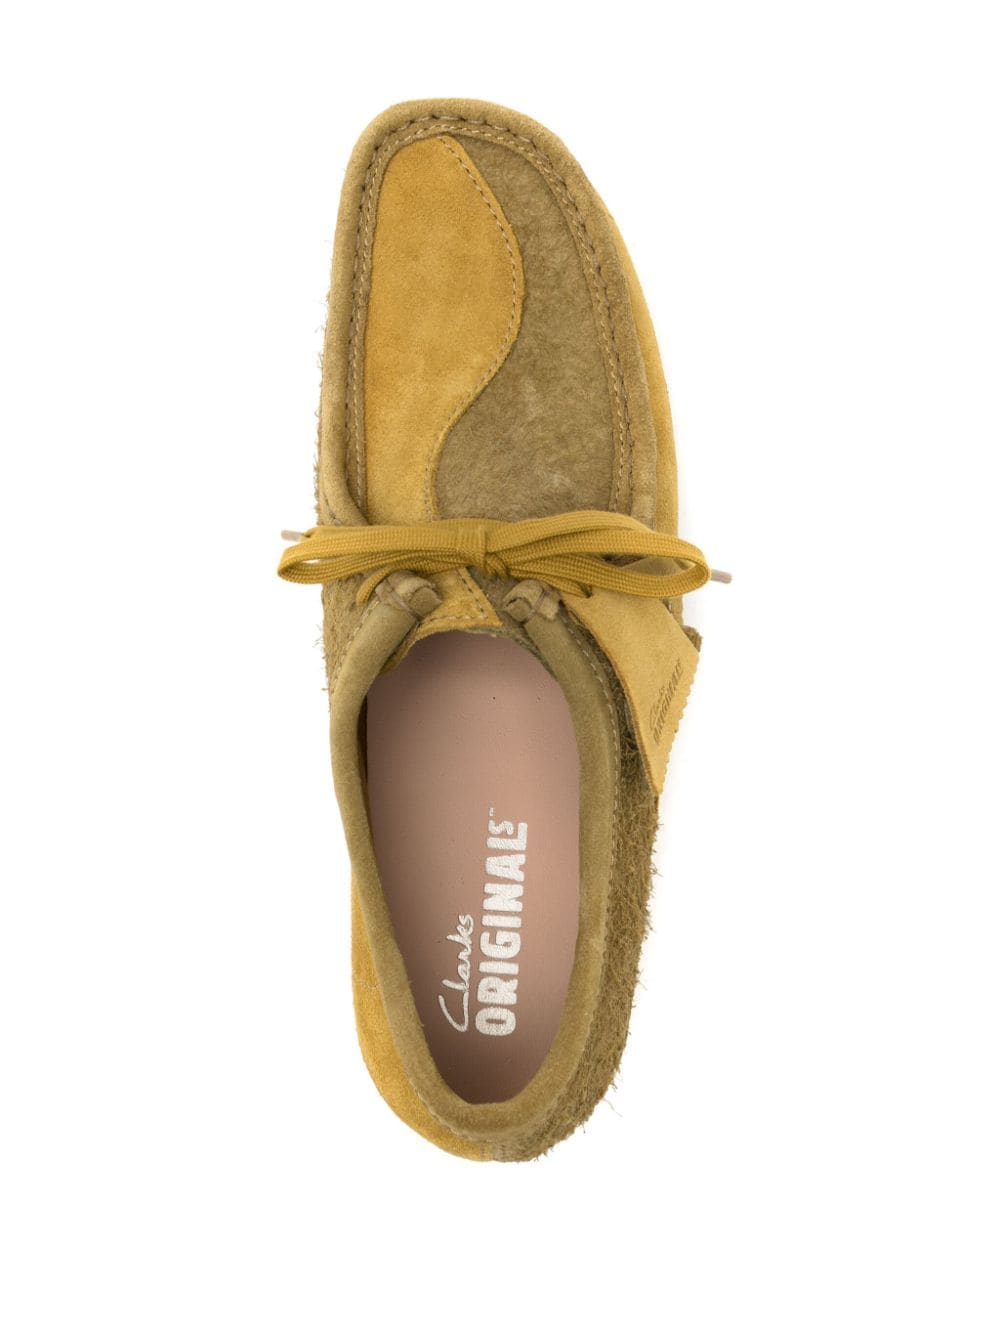 WALLABEE OLIVE COMBINATION 靴